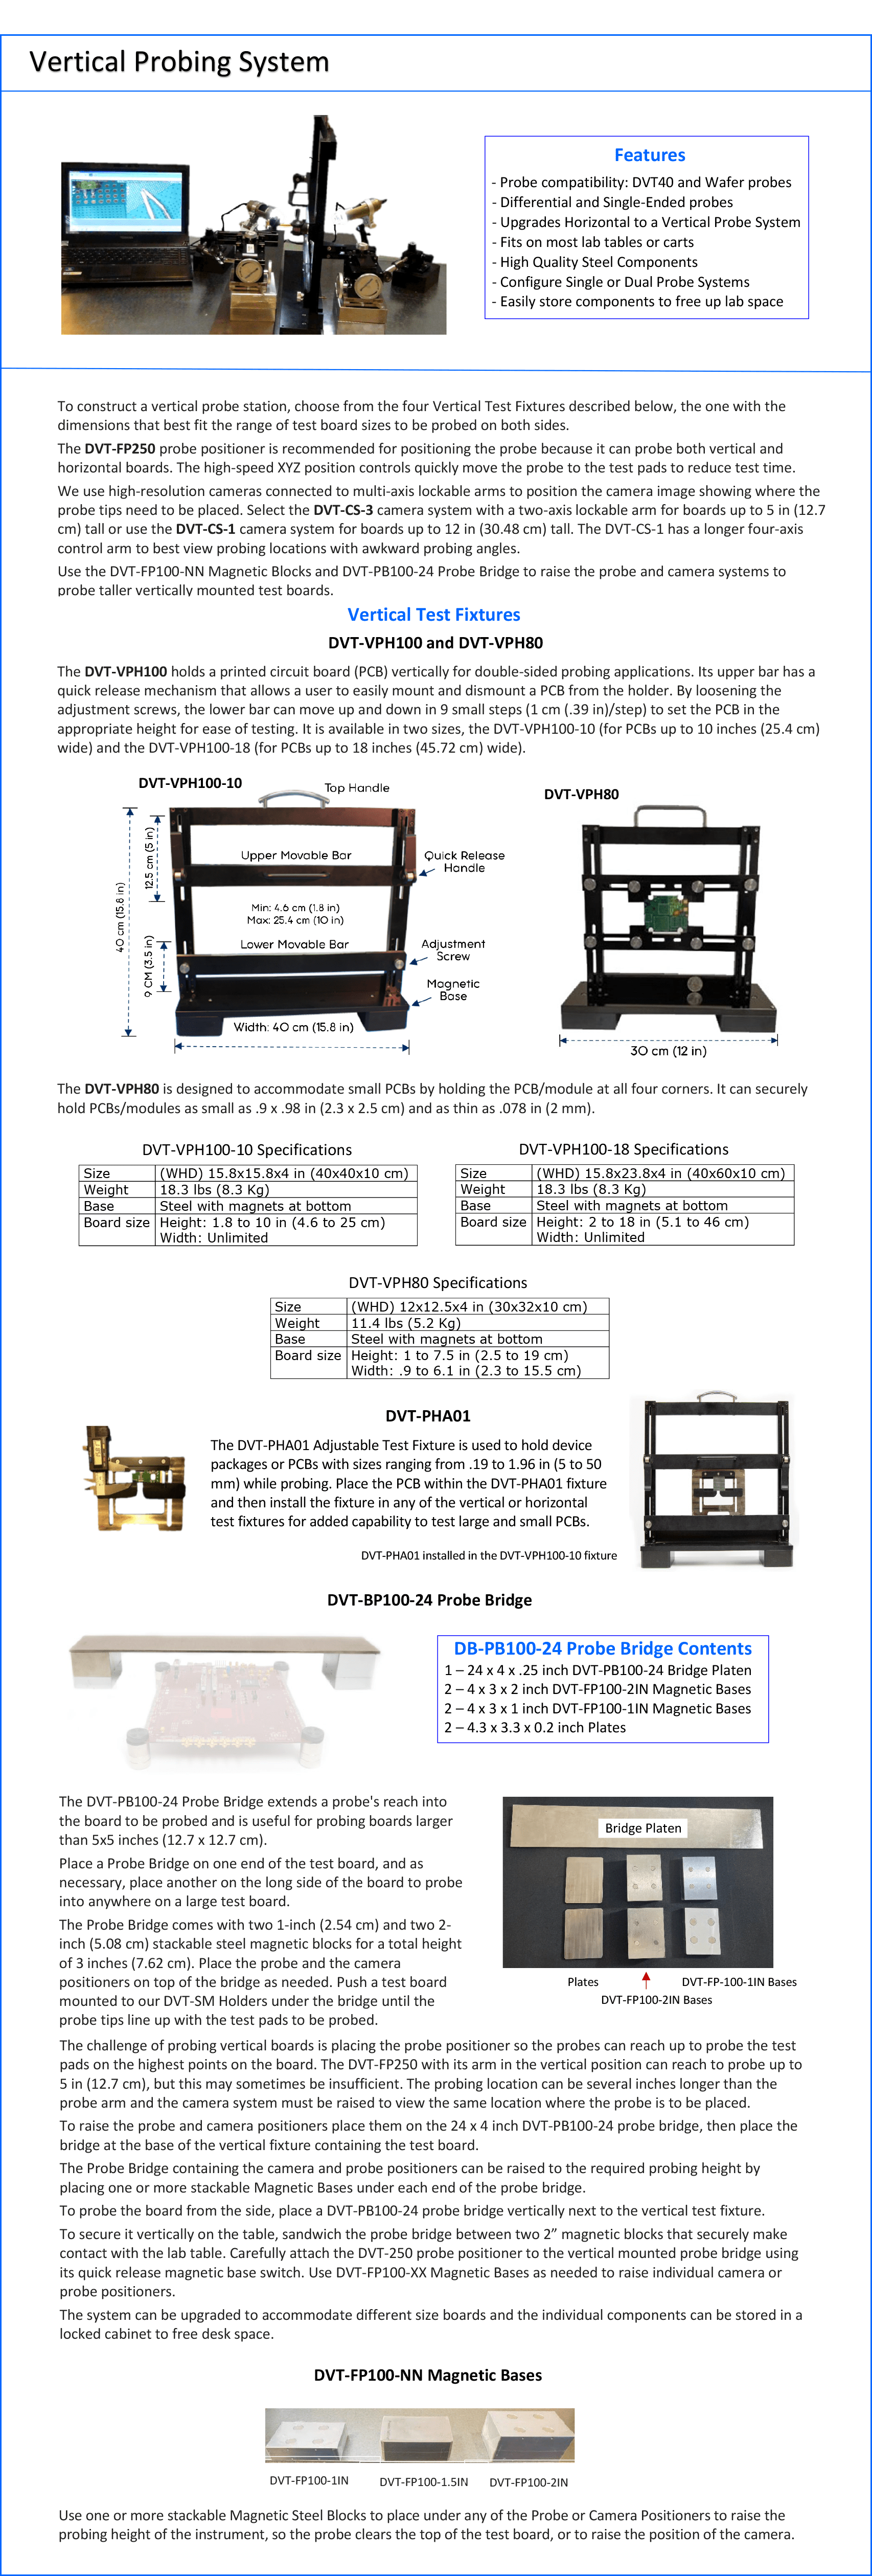 Image of the datasheet for the Vertical Probing System.